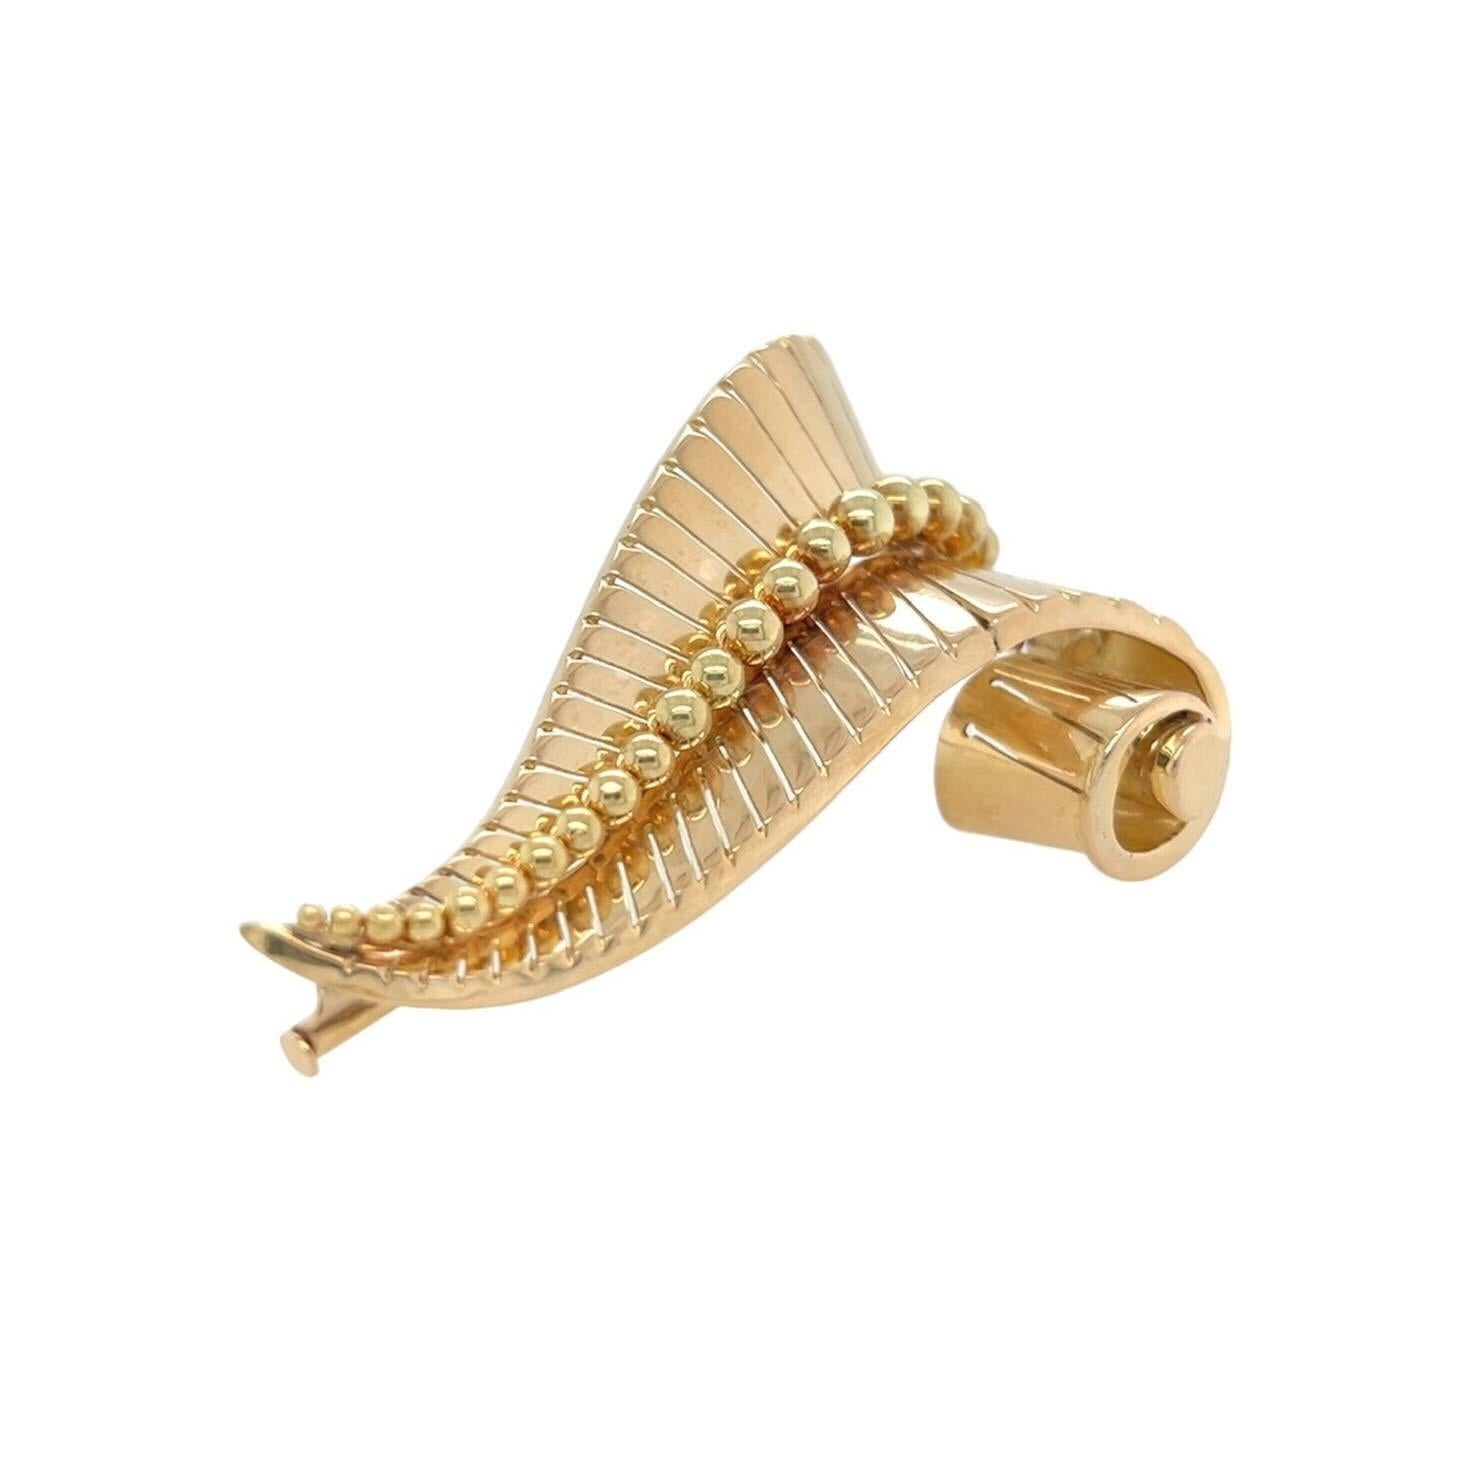 A 14 karat yellow gold brooch, circa 1940s.  Designed as a scrolling tapered horizontally striated motif applied with a graduated row of gold beadwork down the center.  Length approximately 2 5/8 inches.  Gross weight approximately 22.20 grams.